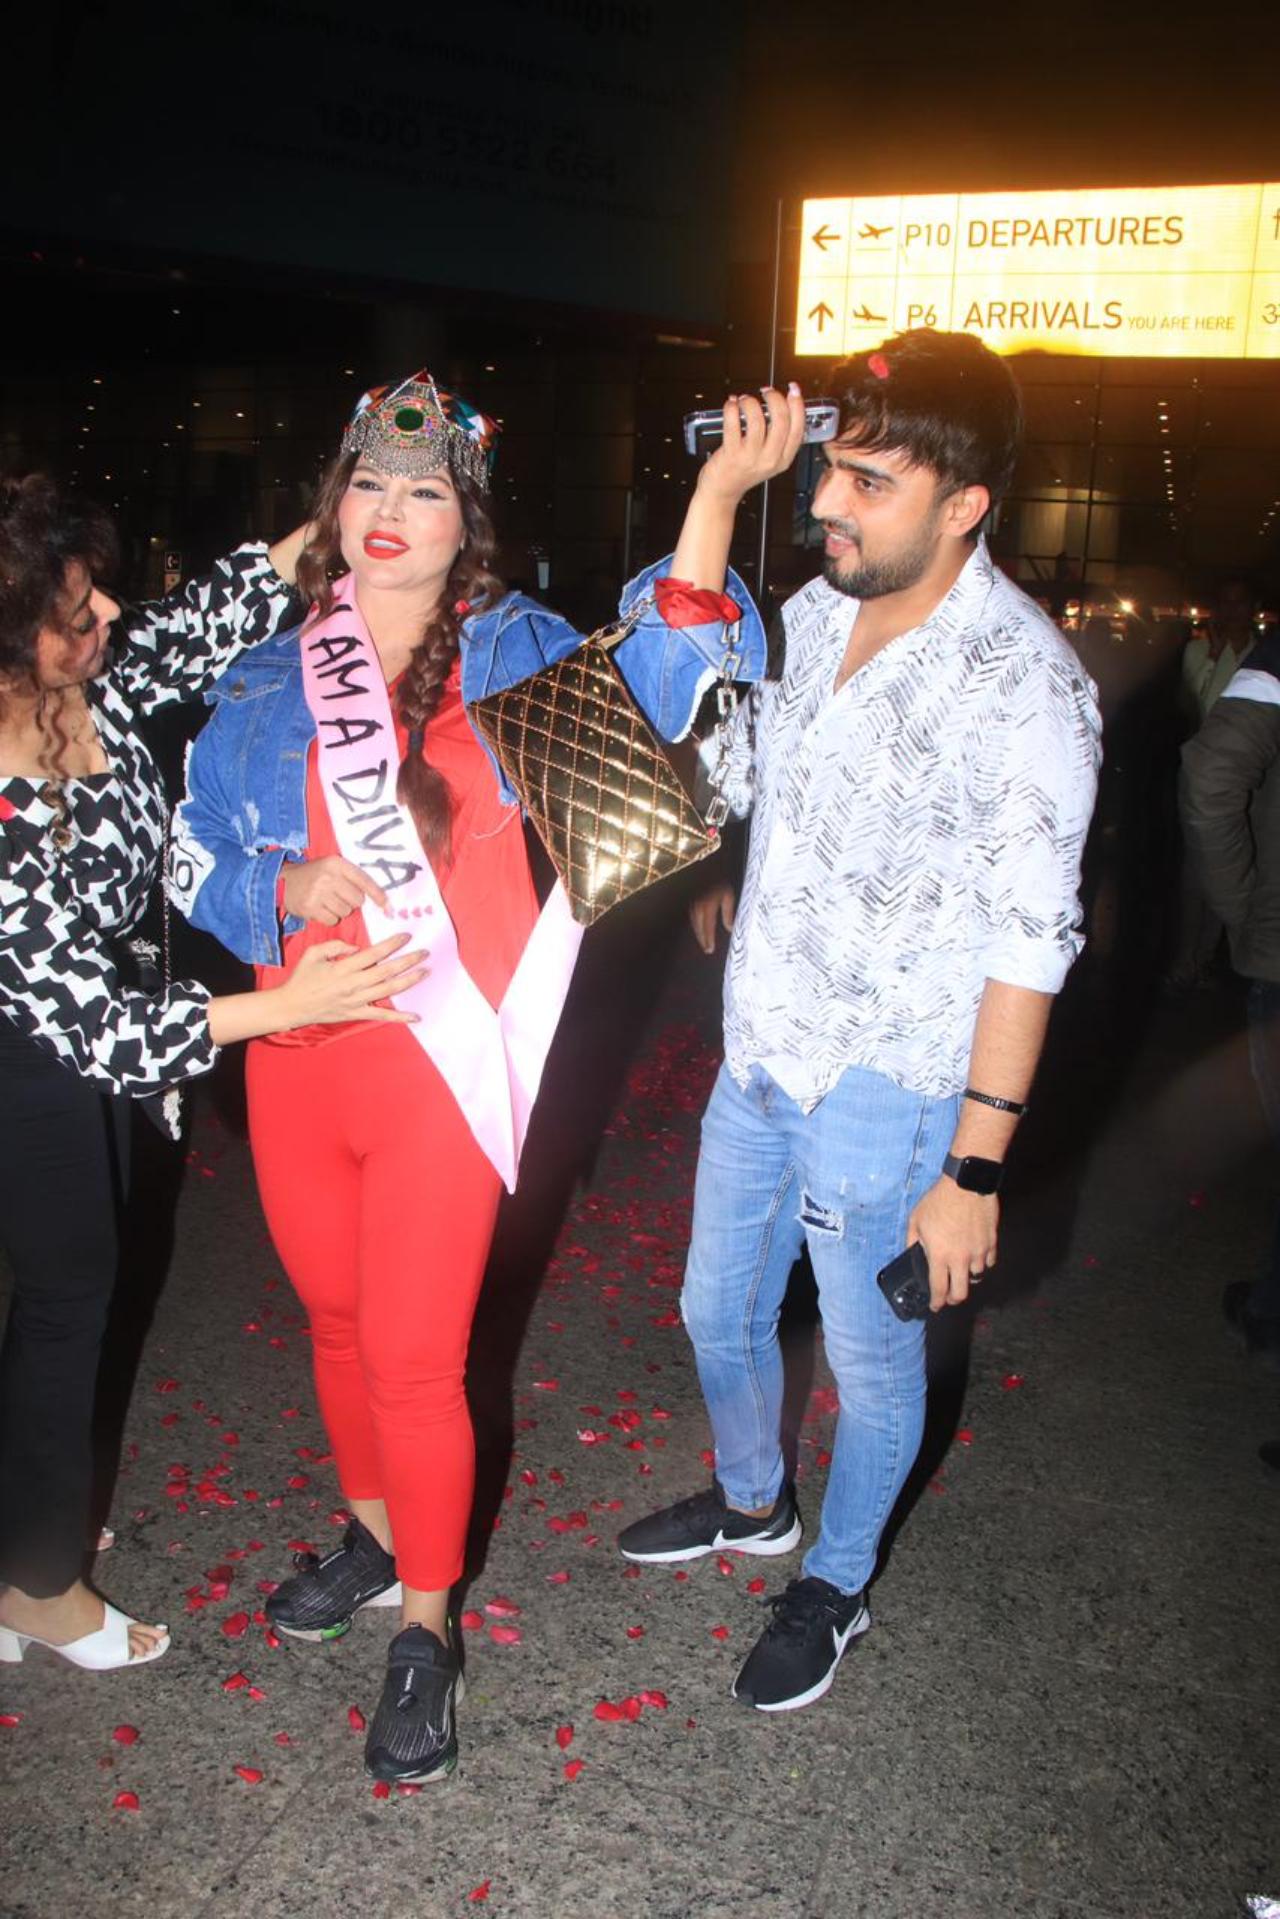 With red rose petals showered on her, Rakhi walked on the premise outside the airport with boyfriend Adil Khan by her side